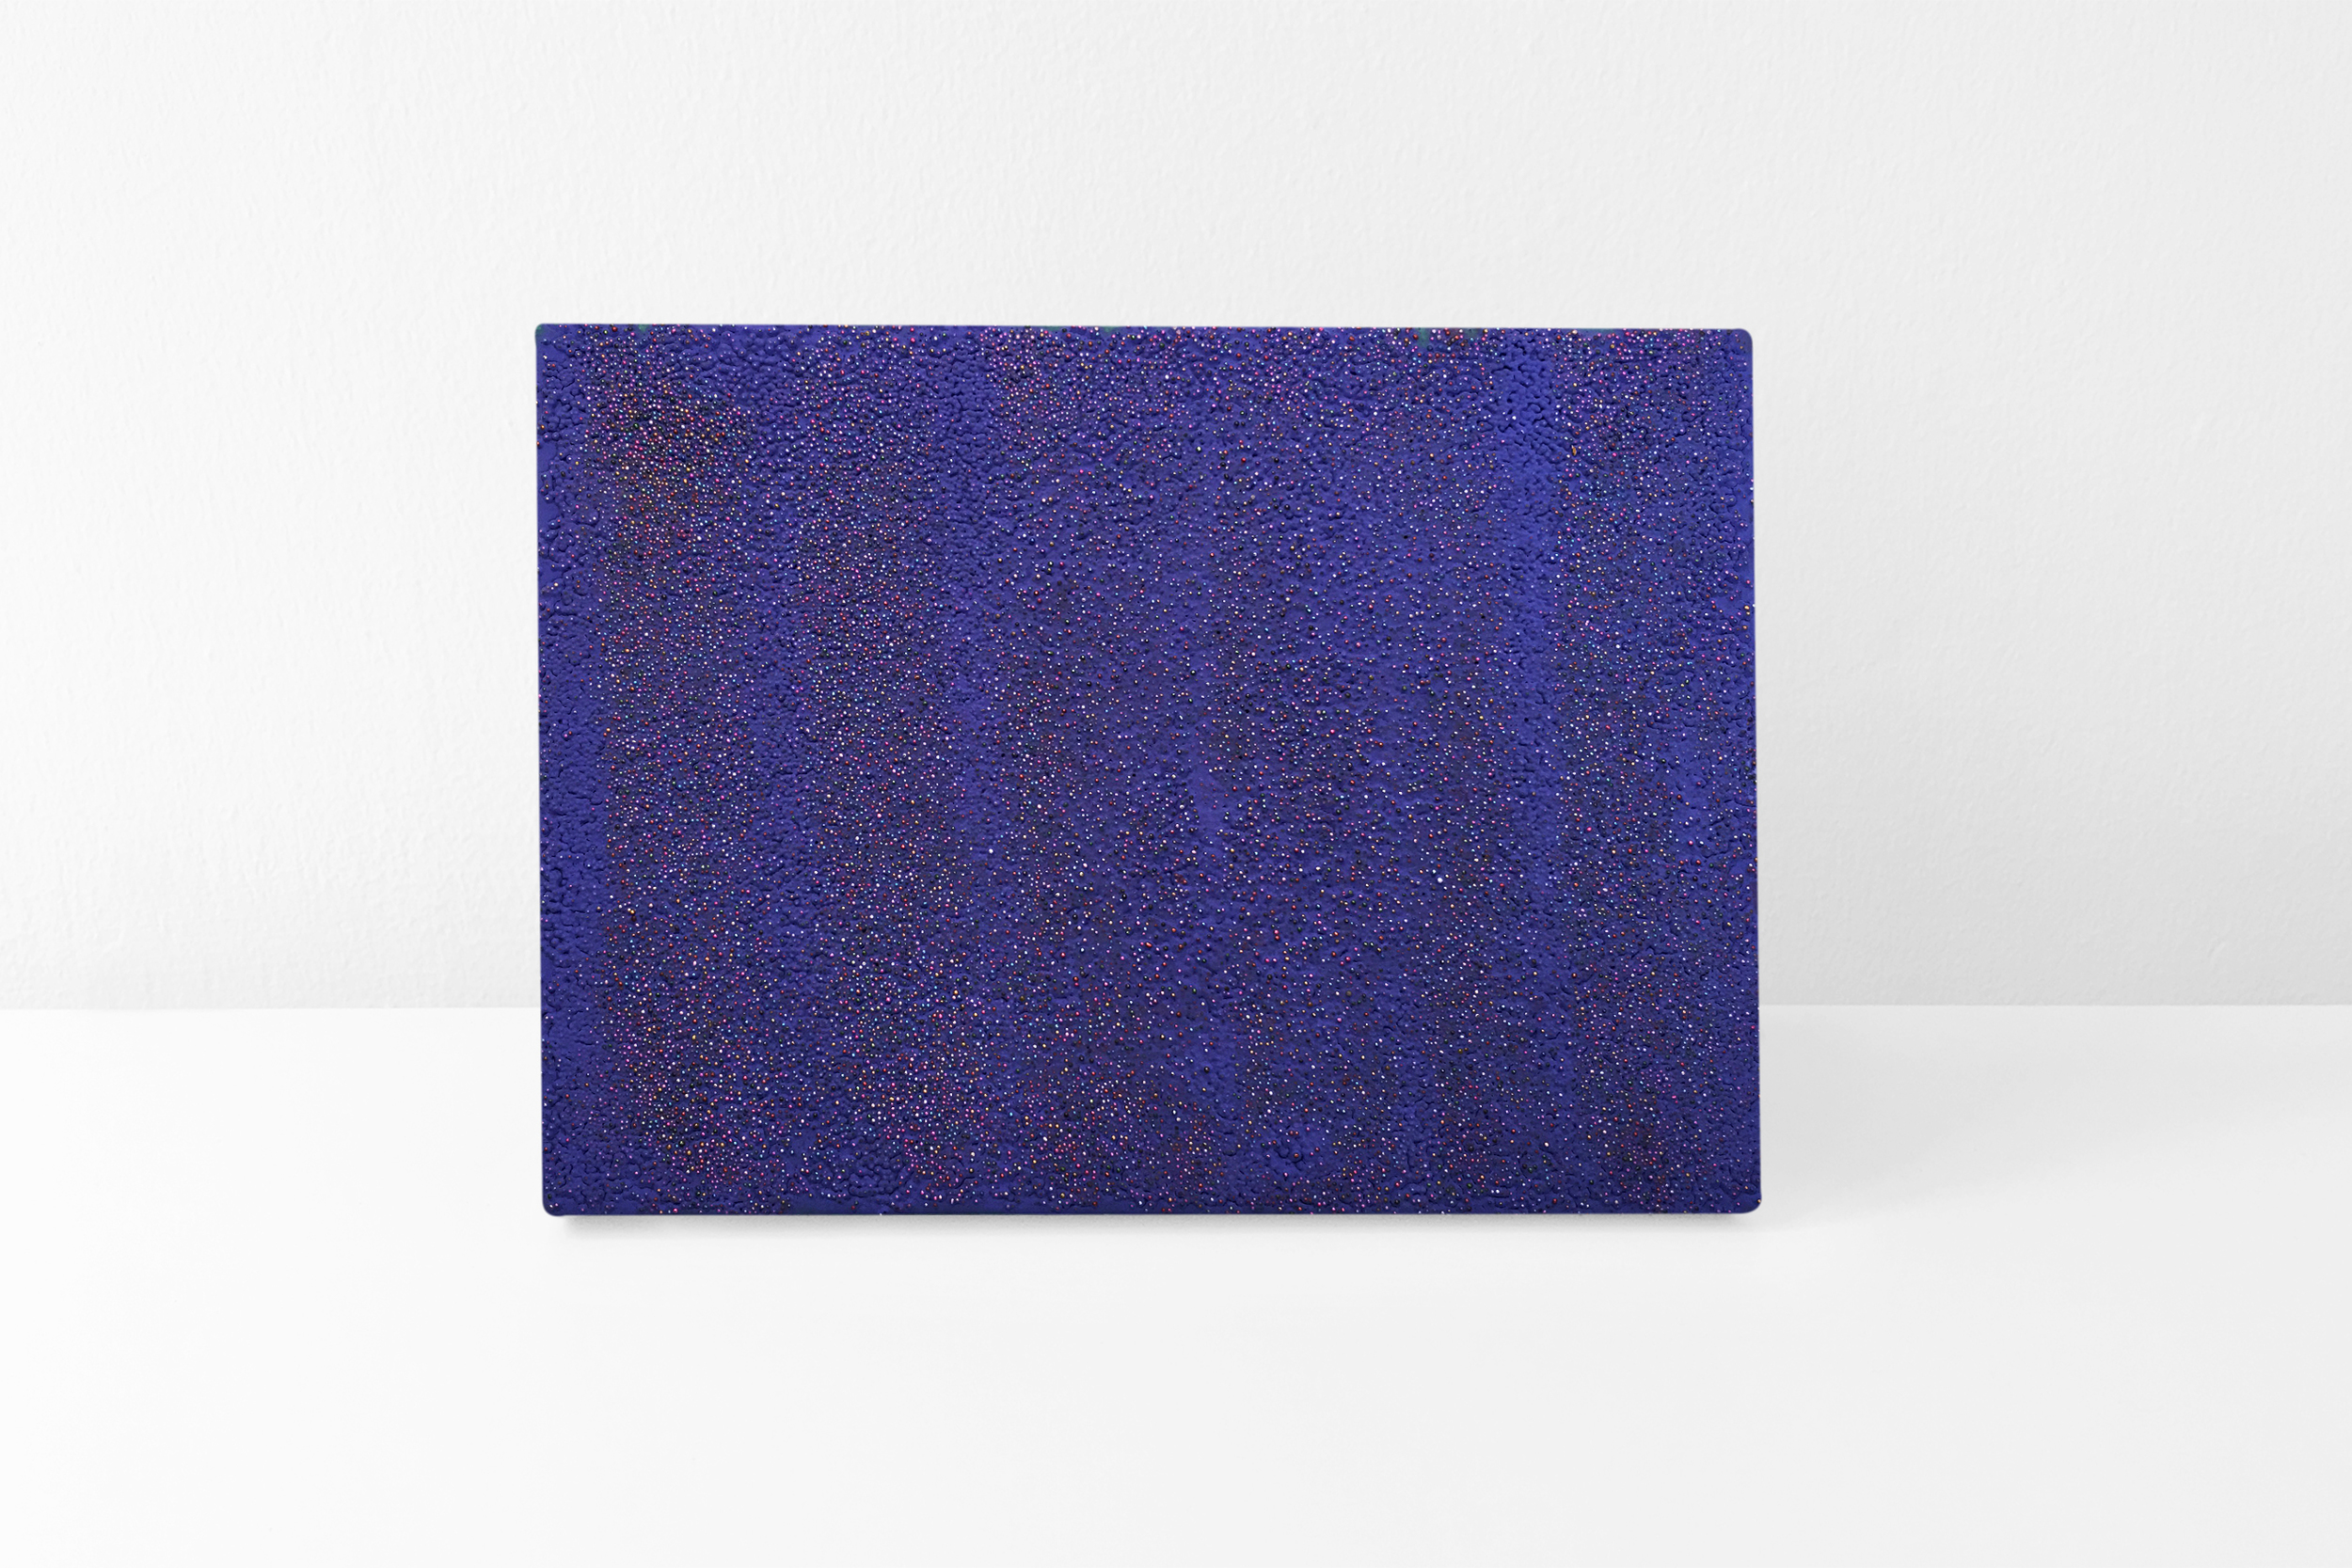  Purple dots, 2016 mixed media on canvas 19x24 cm / 7.5x9 in EAF140    